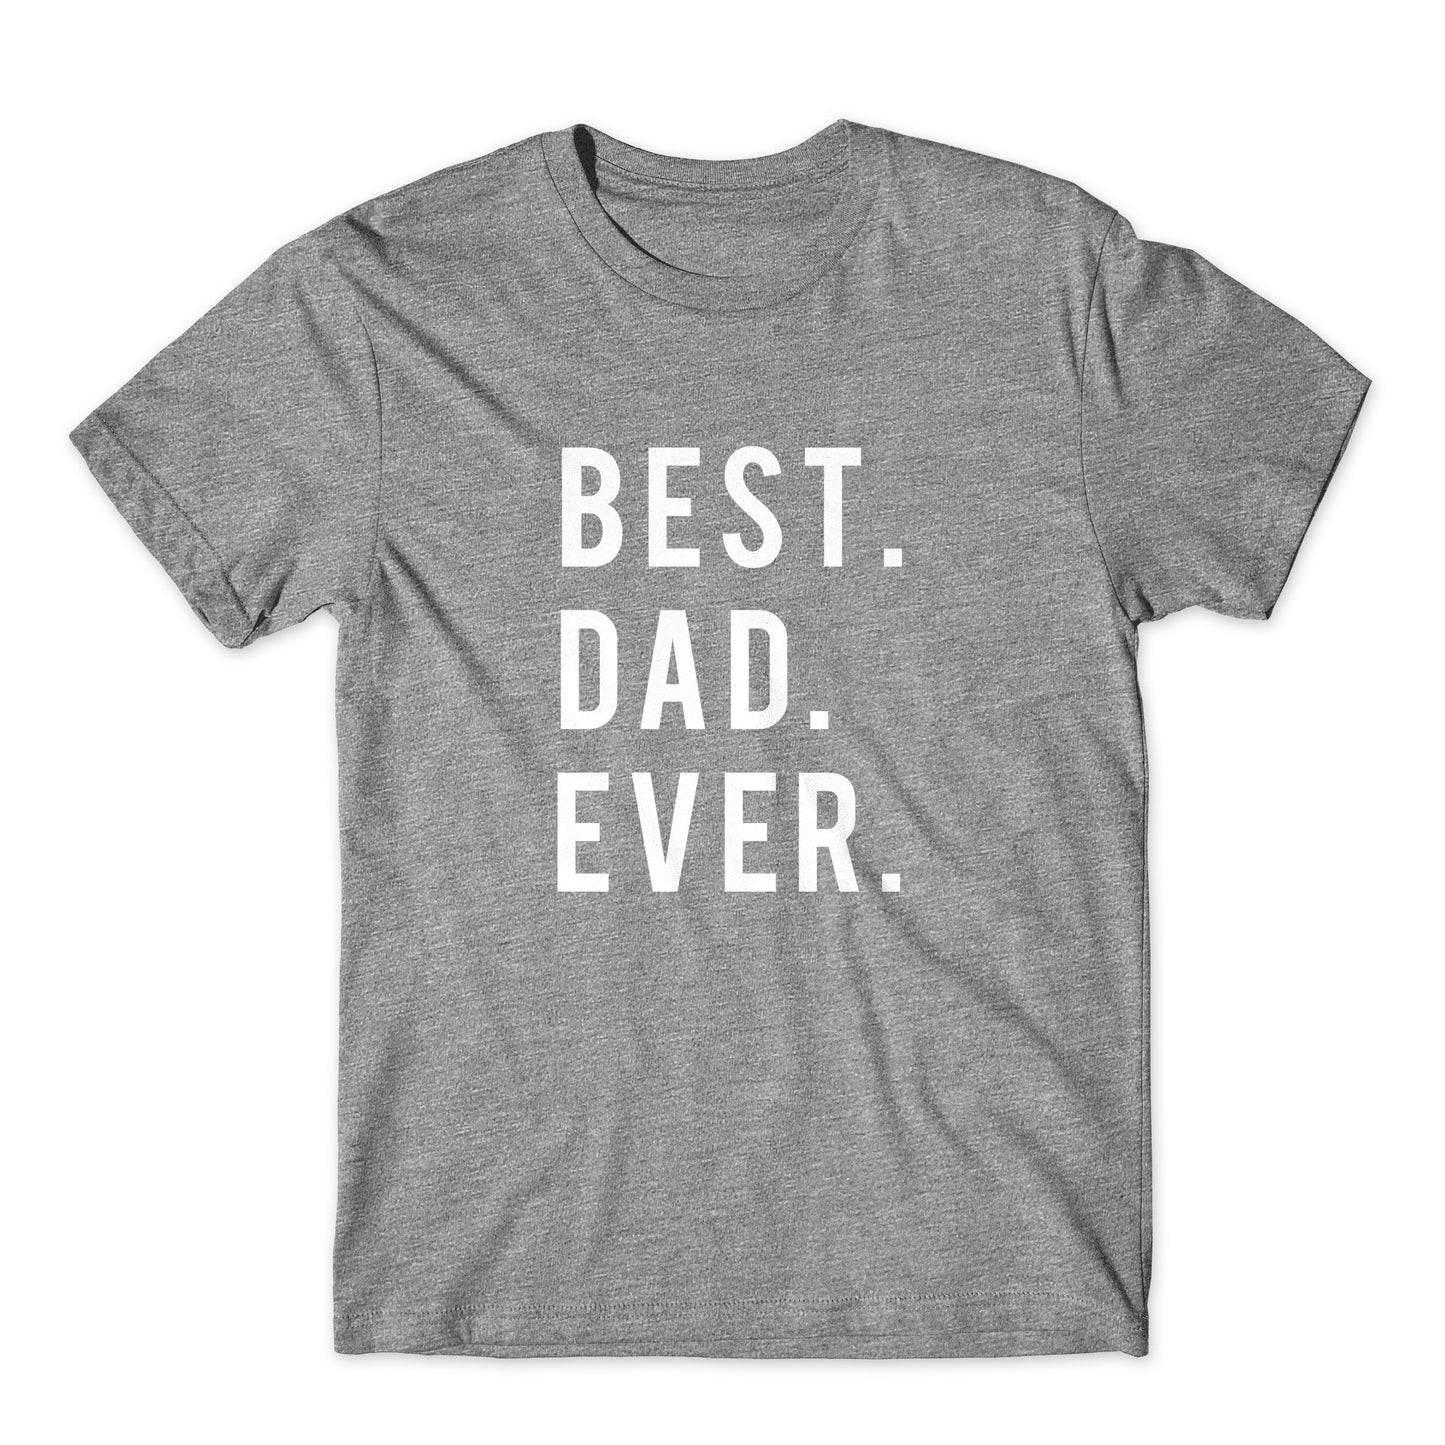 Best. Dad. Ever. On Black, White, or Gray Soft Cotton  Premium Shirt. Father's Day Gift for Dad. Comfy!